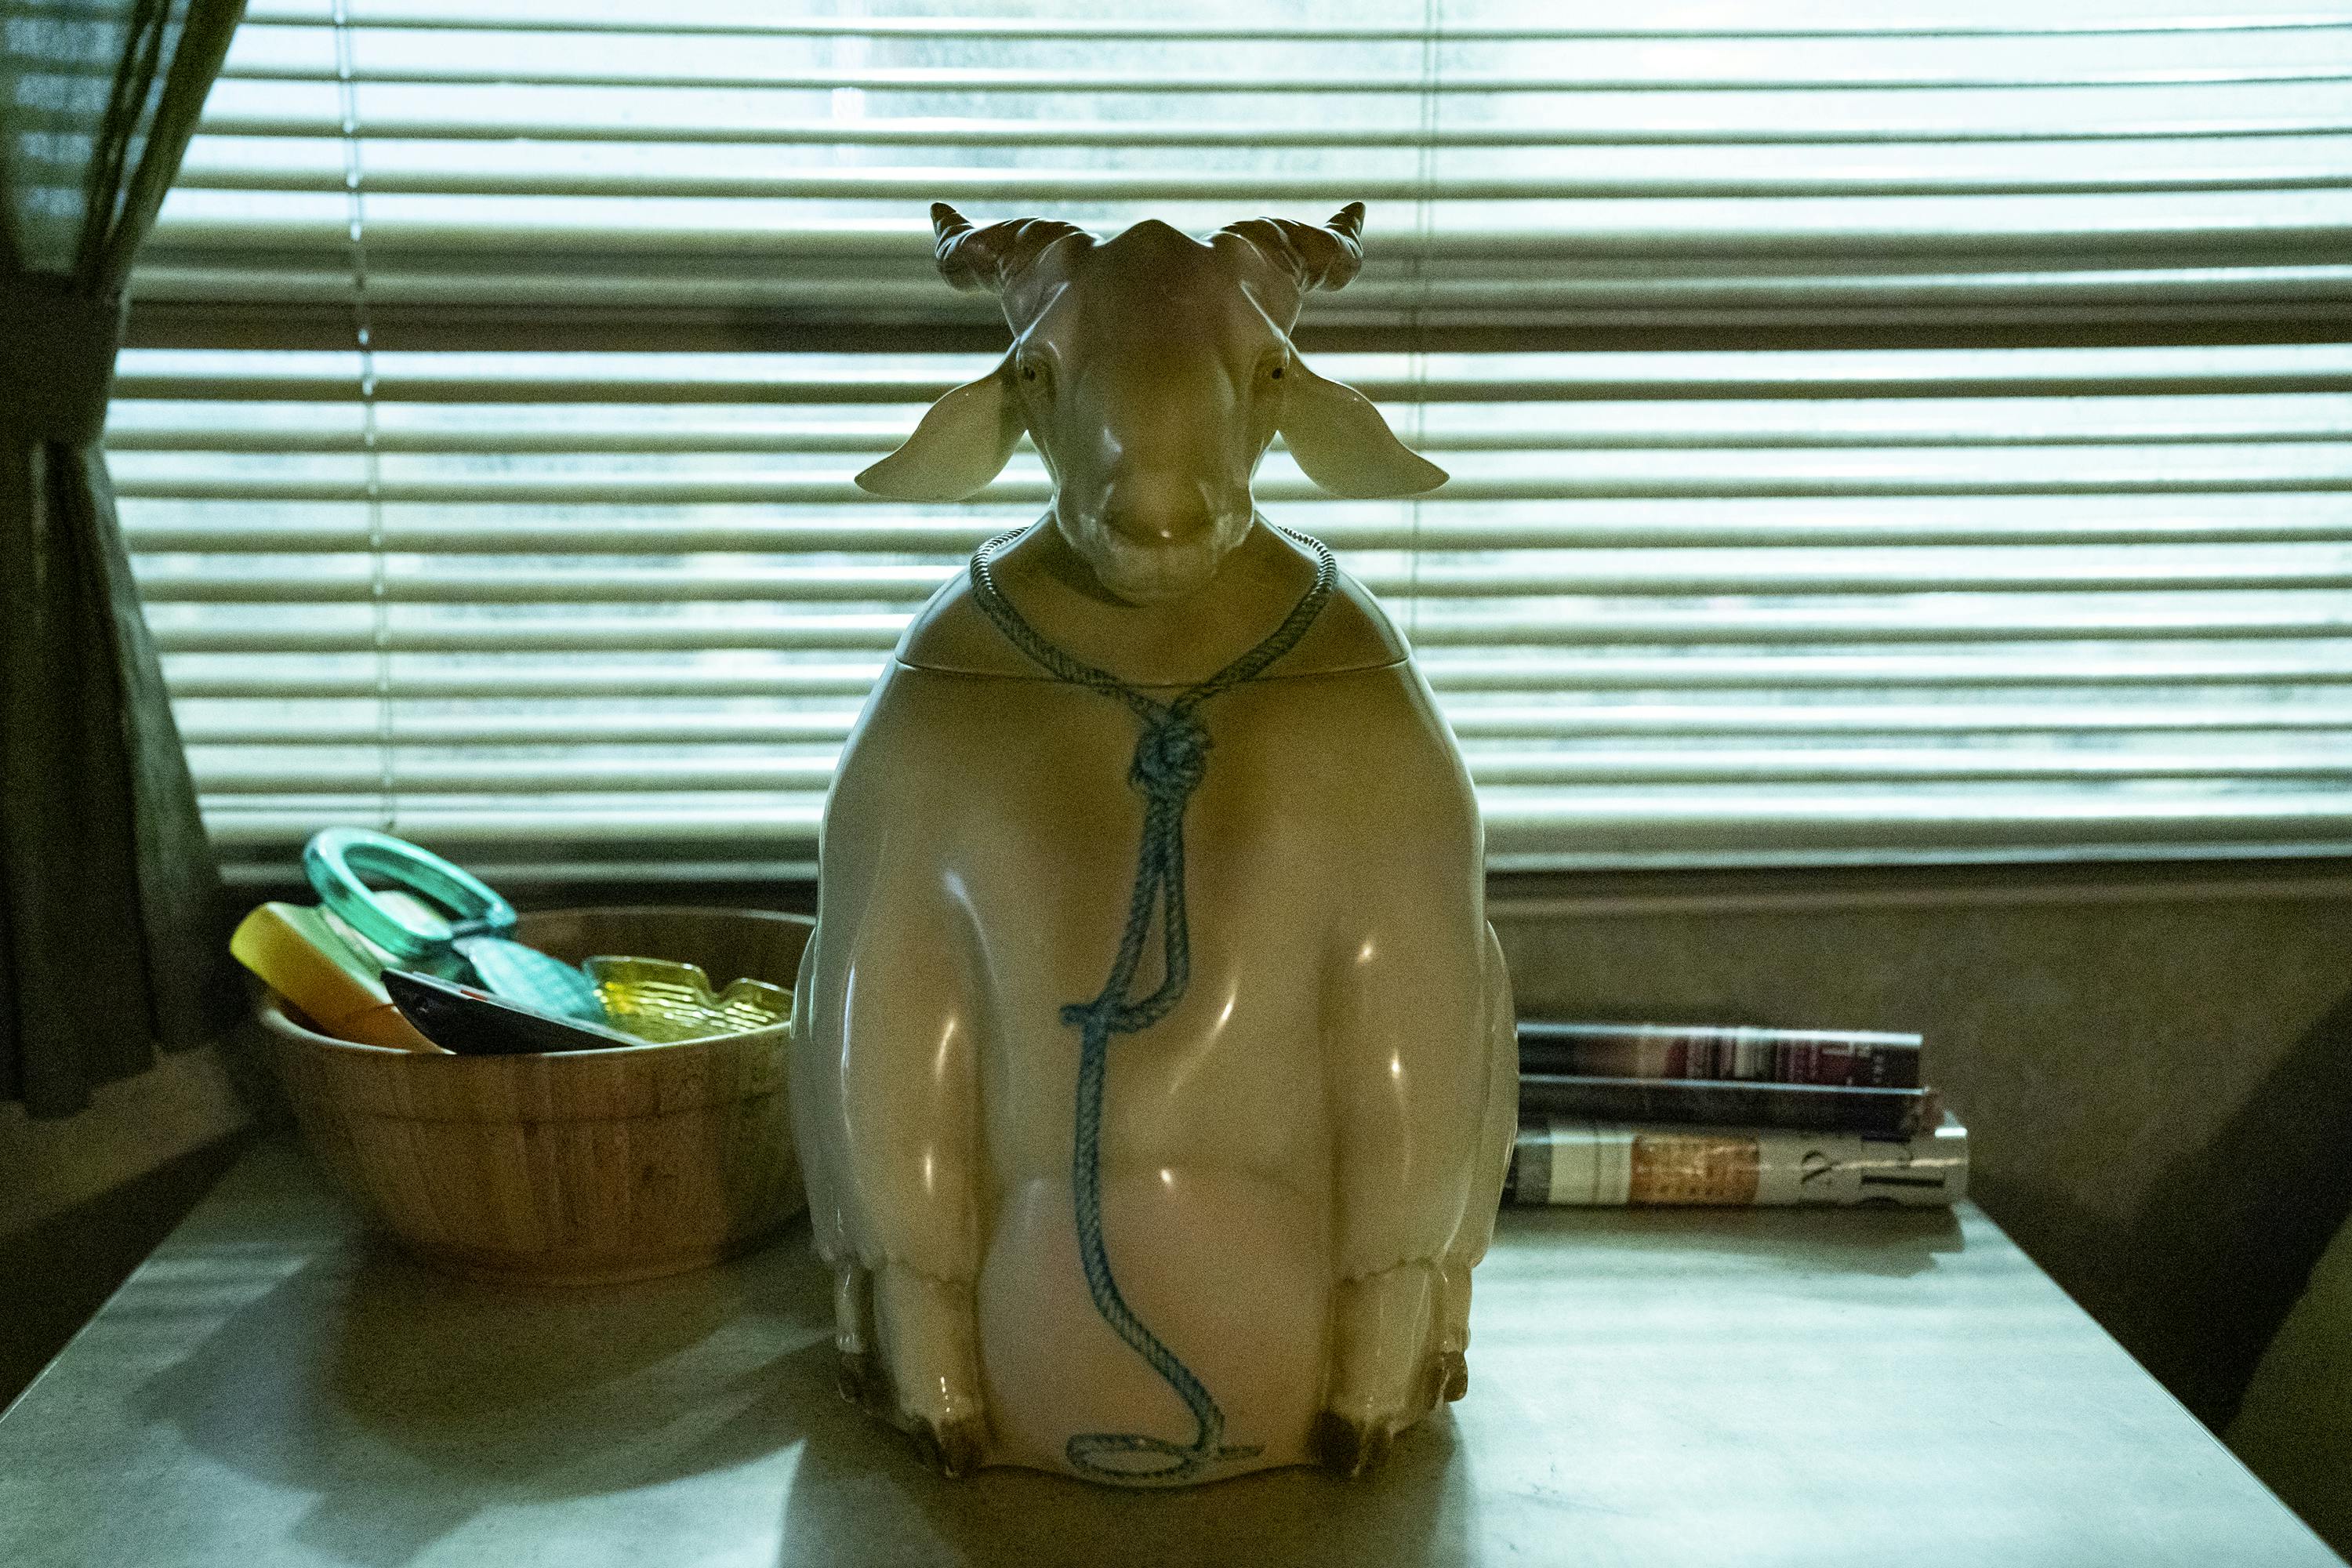 The goat cookie jar.